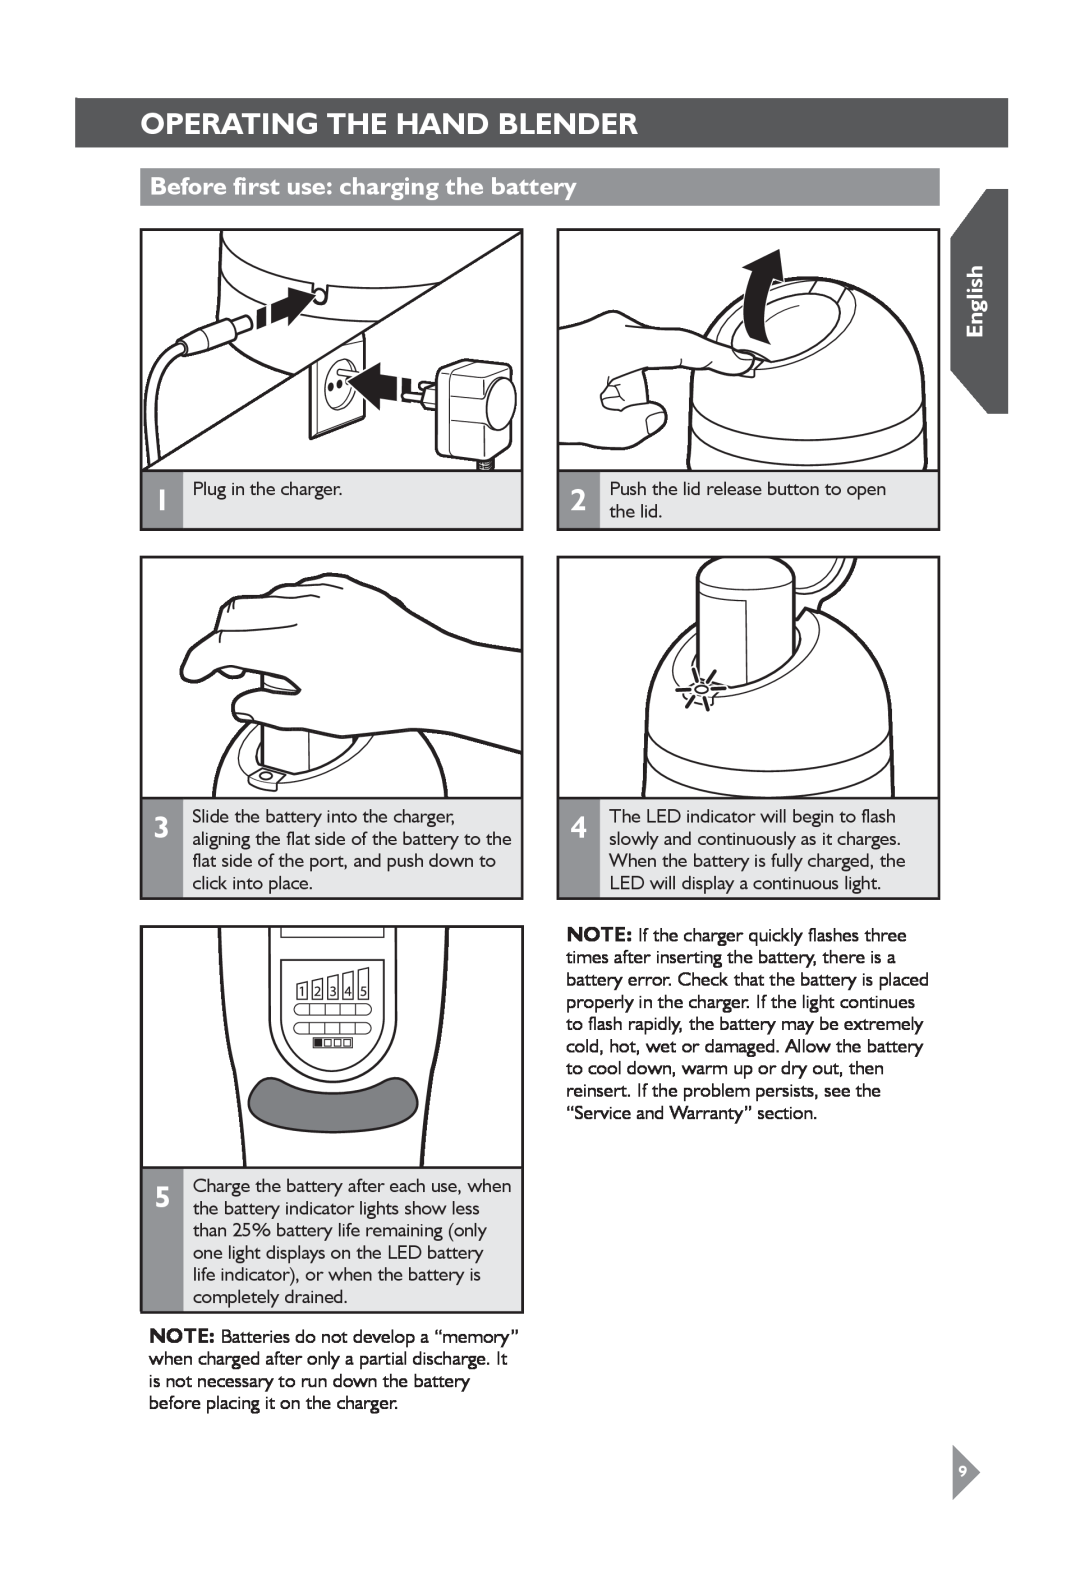 KitchenAid 5KHB3583 manual Operating the hand blender, Before first use charging the battery, English 